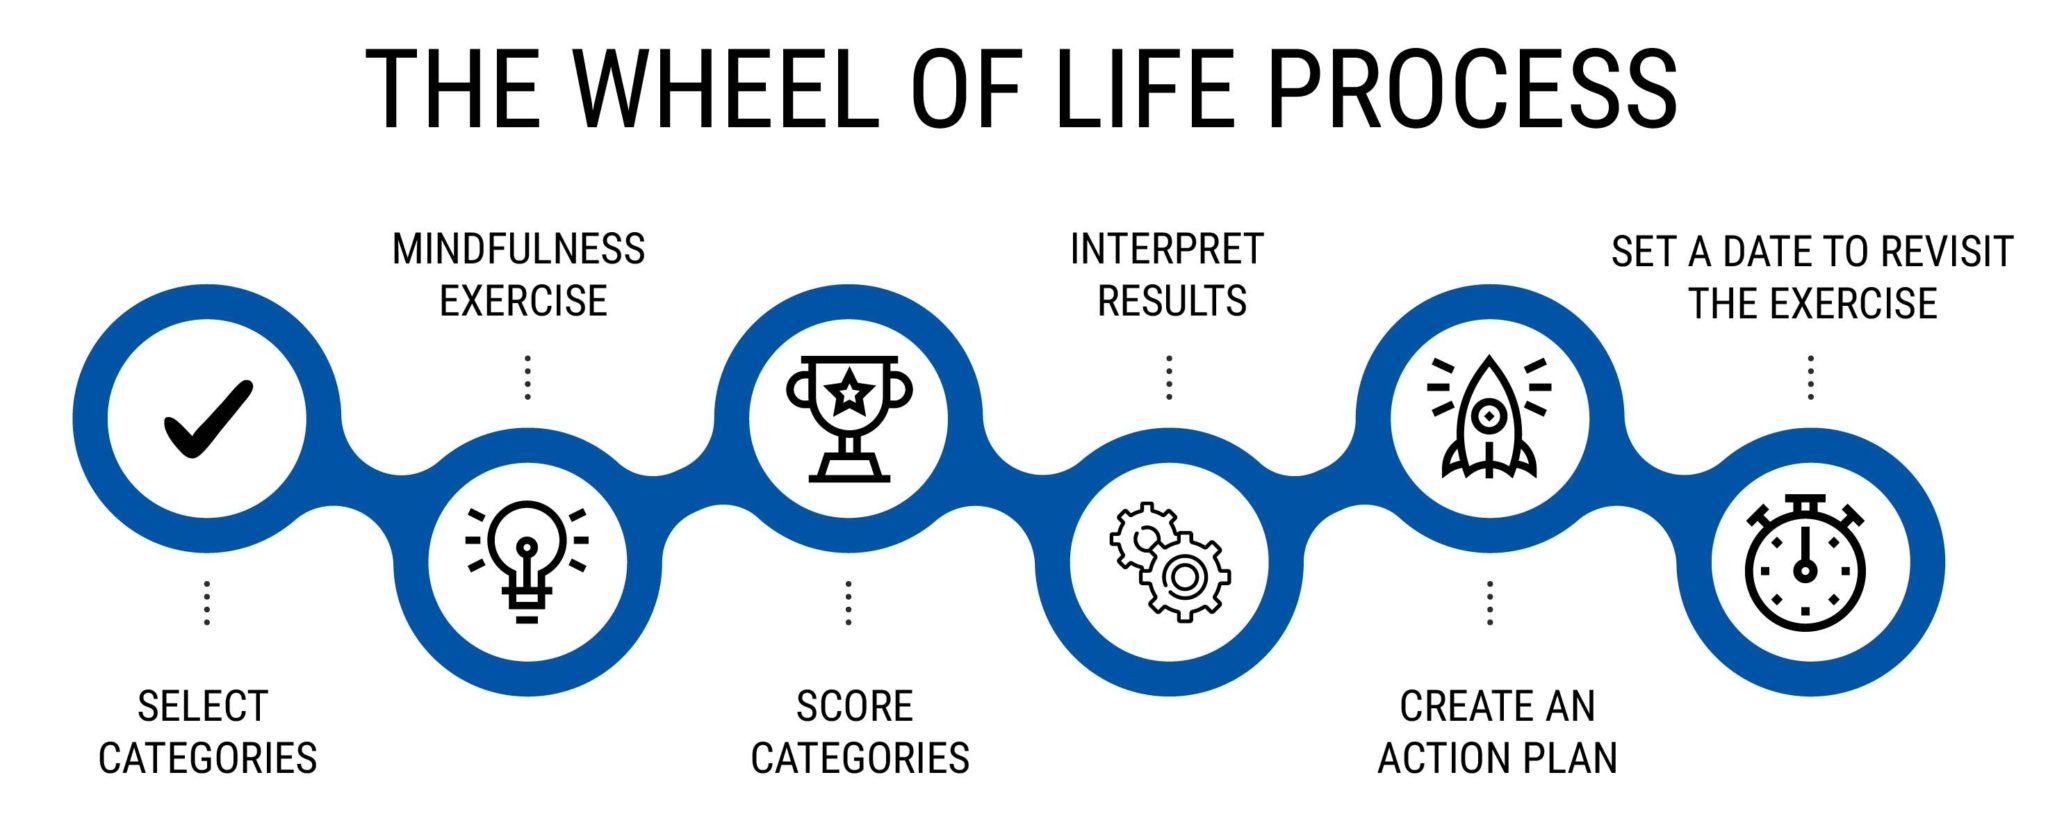 THE WHEEL OF LIFE PROCESS